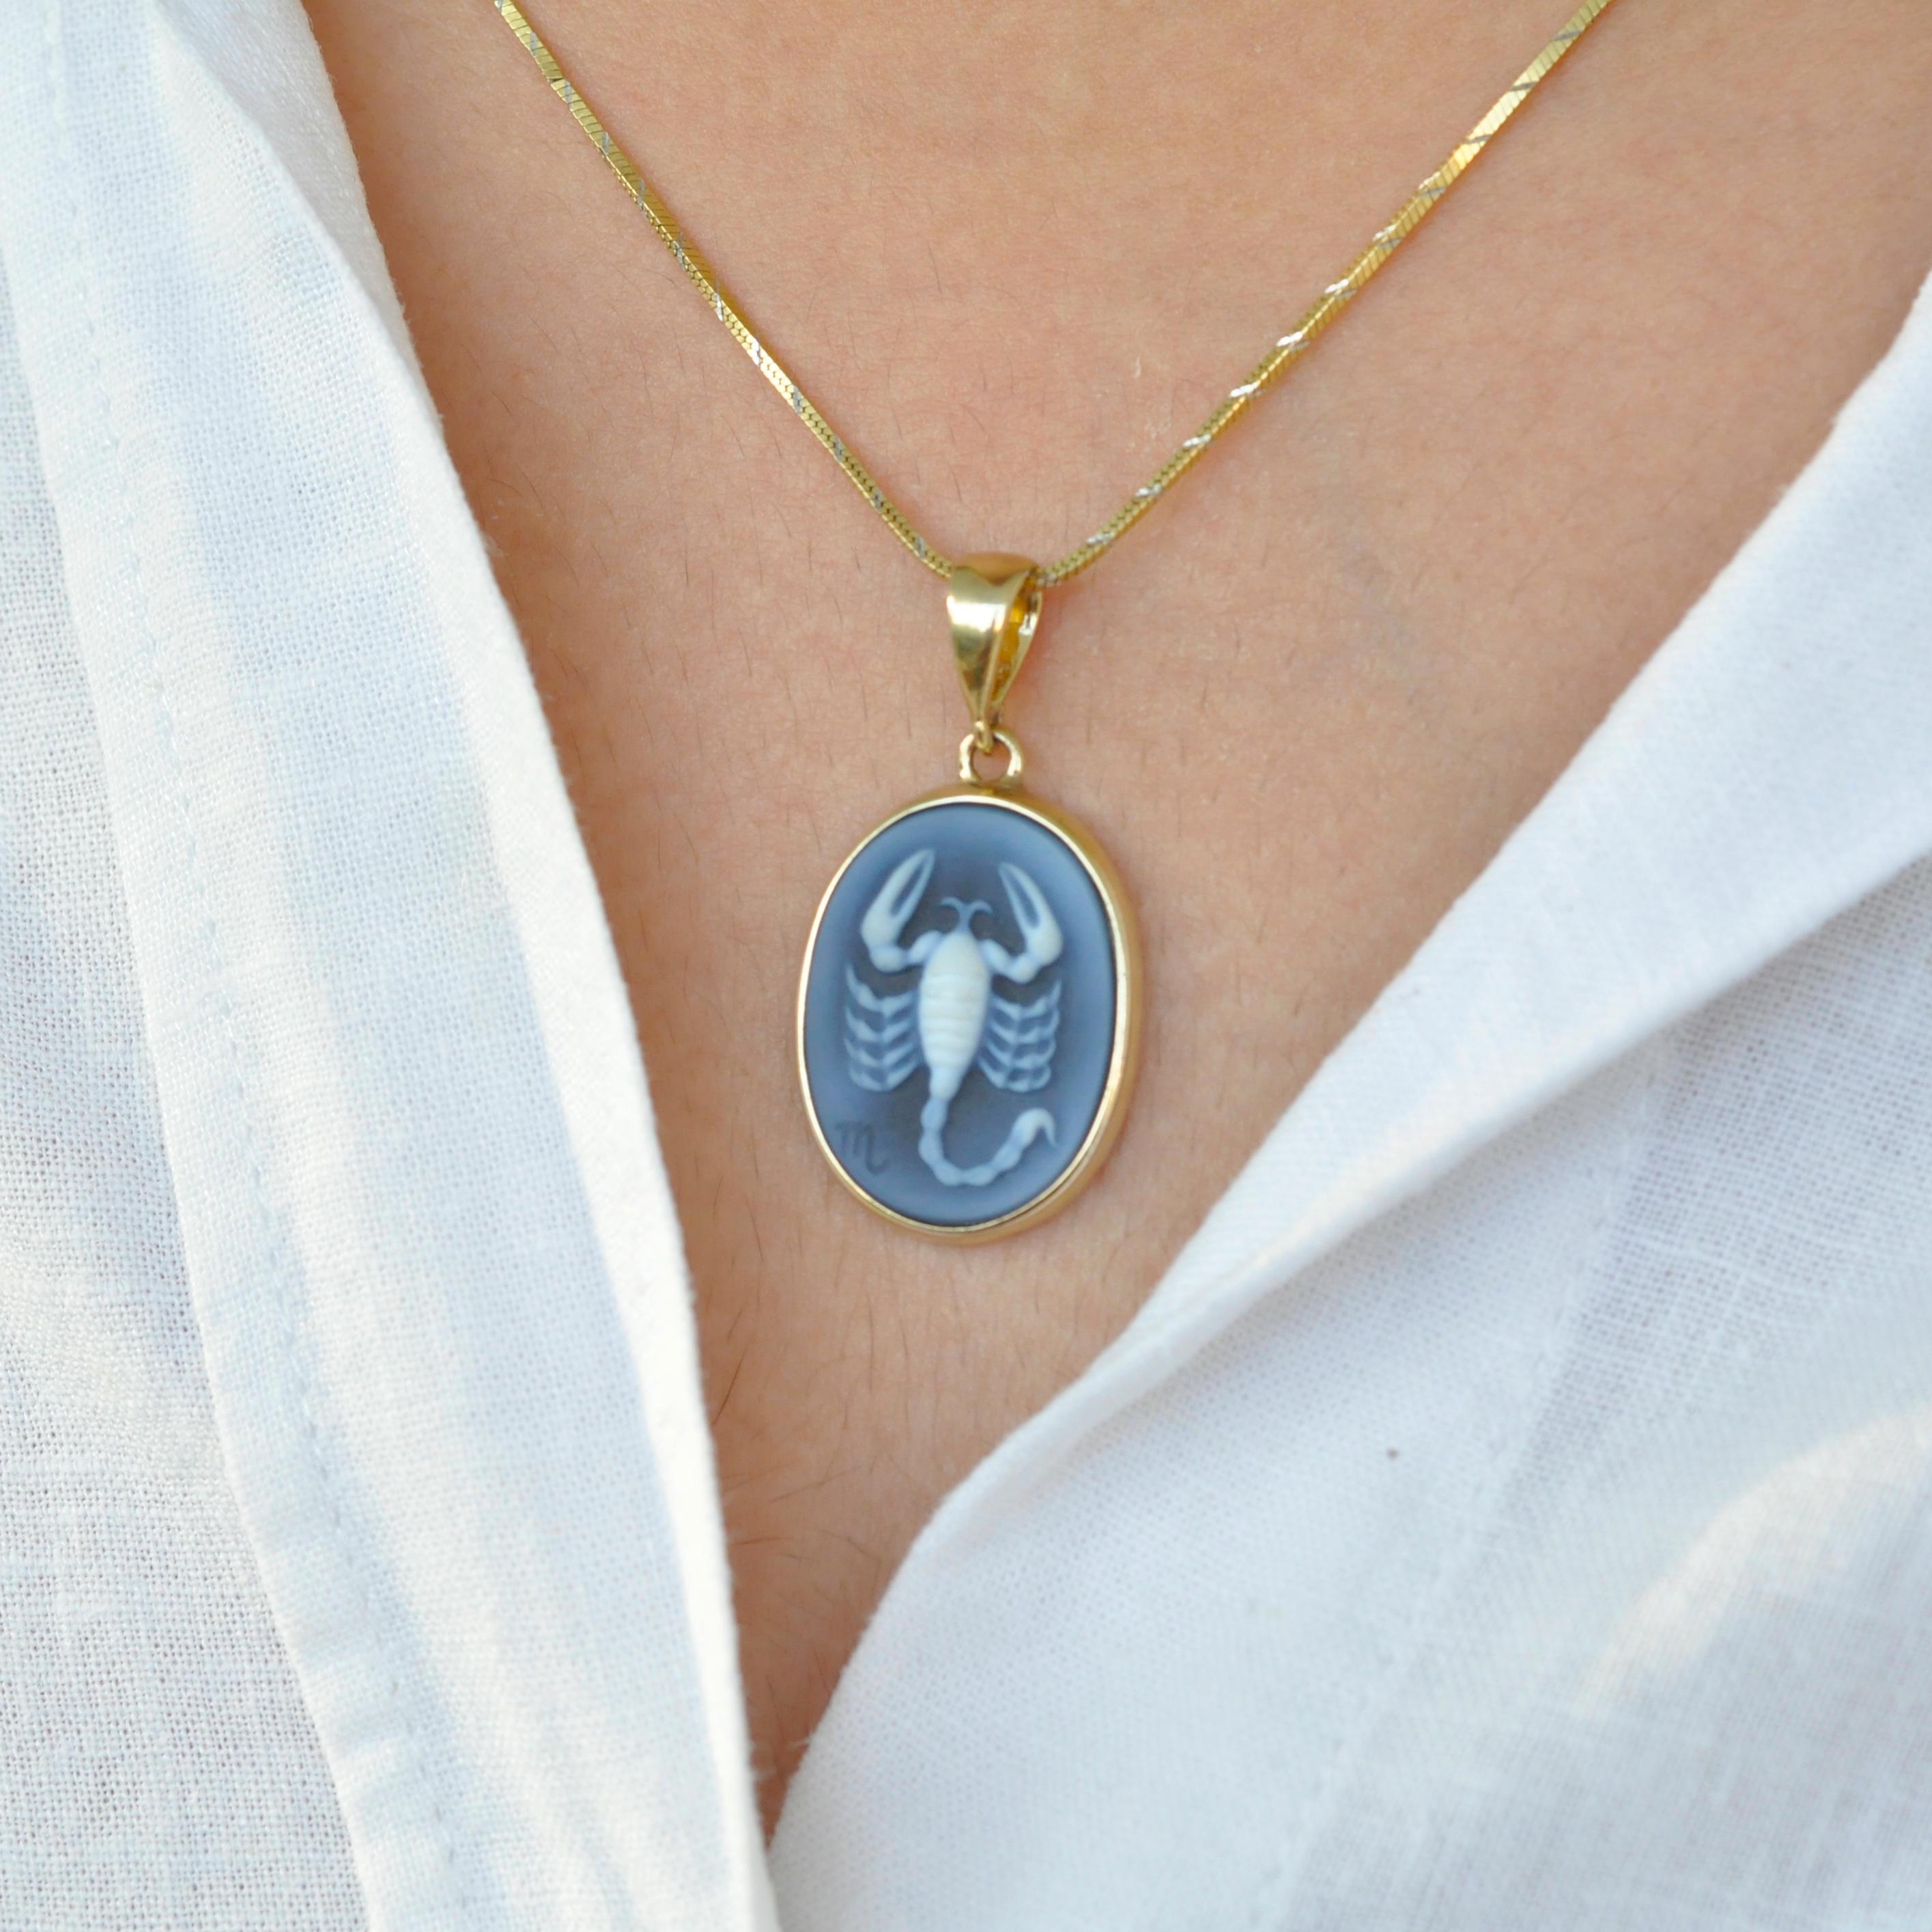 Here's our scorpio zodiac carving cameo pendant necklace from the zodiac collection. The cameo is made in Germany by an expert cameo engraver on the relief of 100% natural agate rock from Brazil (a variety of chalcedony). The pendant is set in our